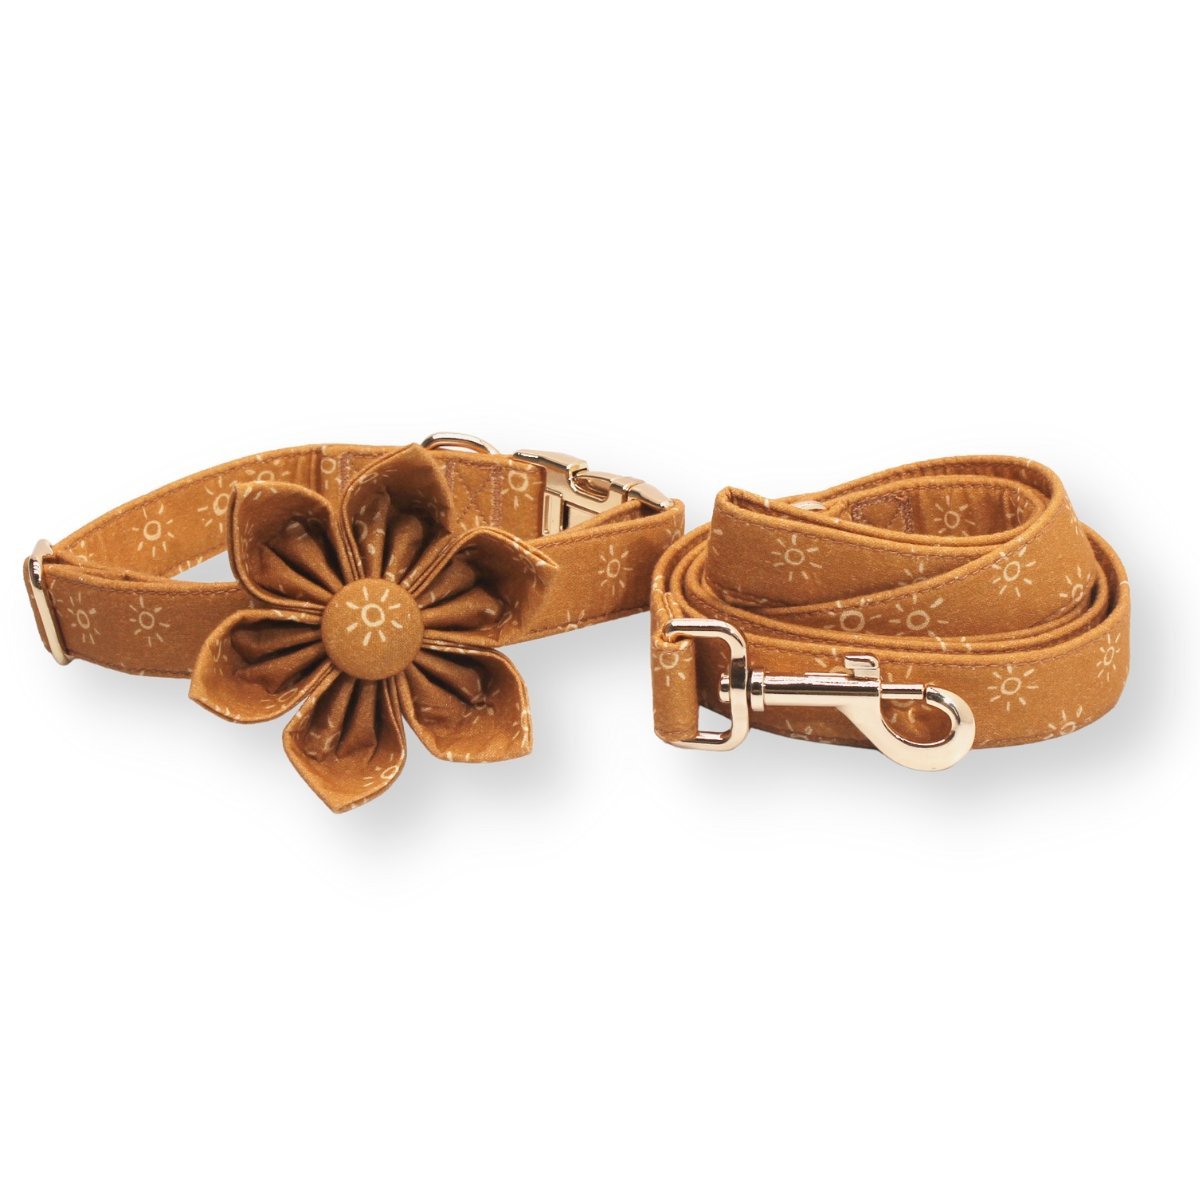 dog collars with bows and flowers - dog collar with flowers for wedding - cute dog collars and leashes